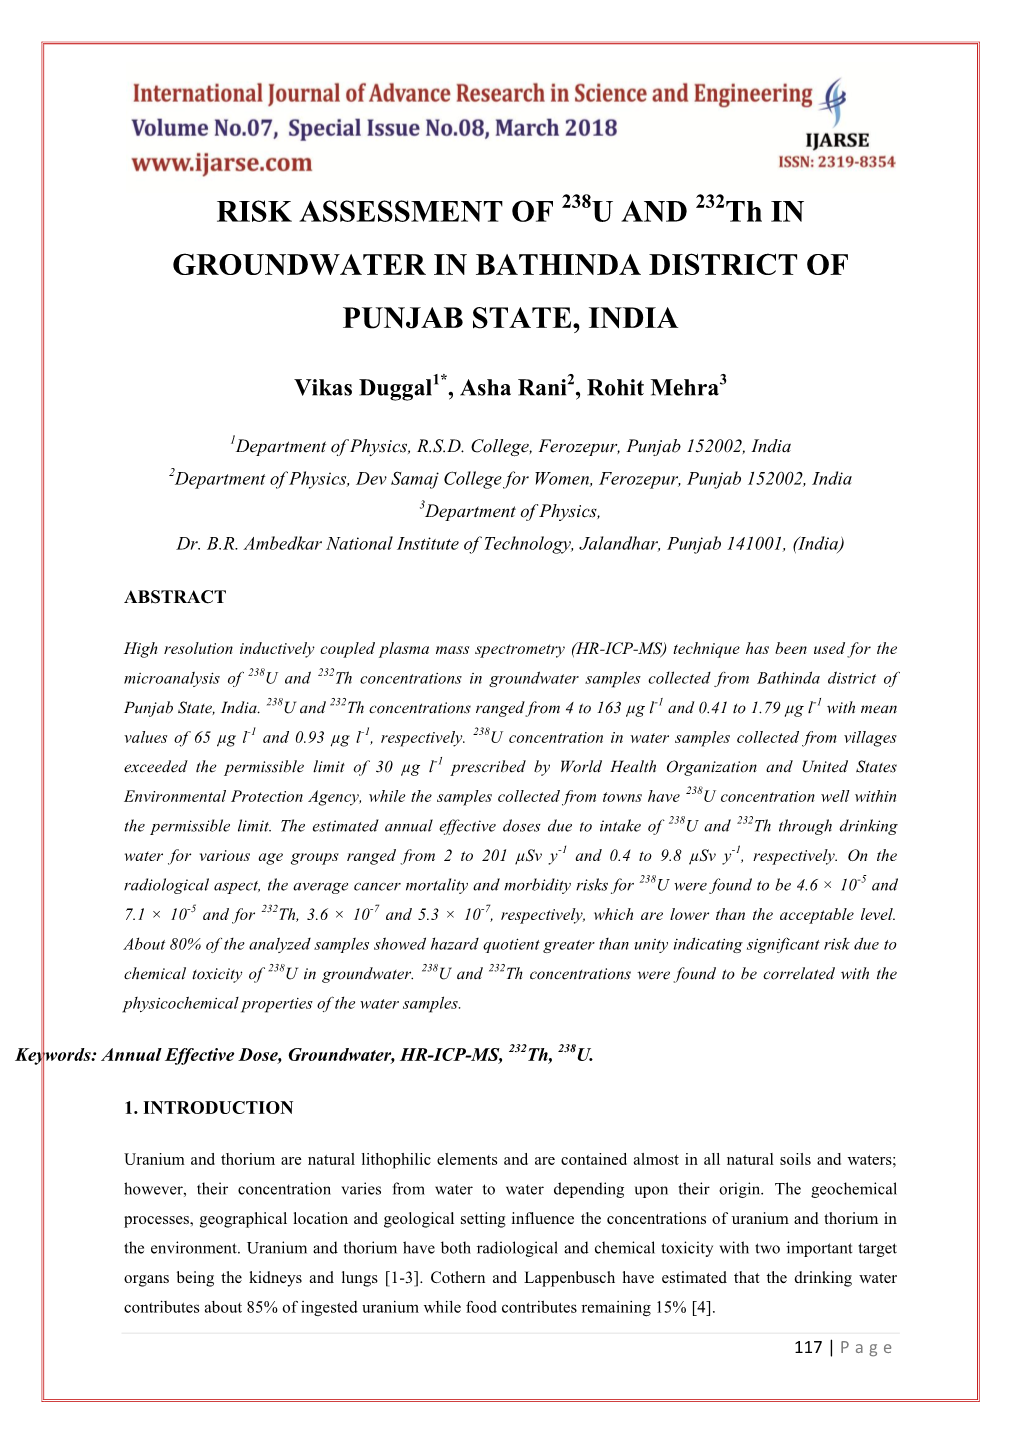 RISK ASSESSMENT of U and Th in GROUNDWATER in BATHINDA DISTRICT of PUNJAB STATE, INDIA